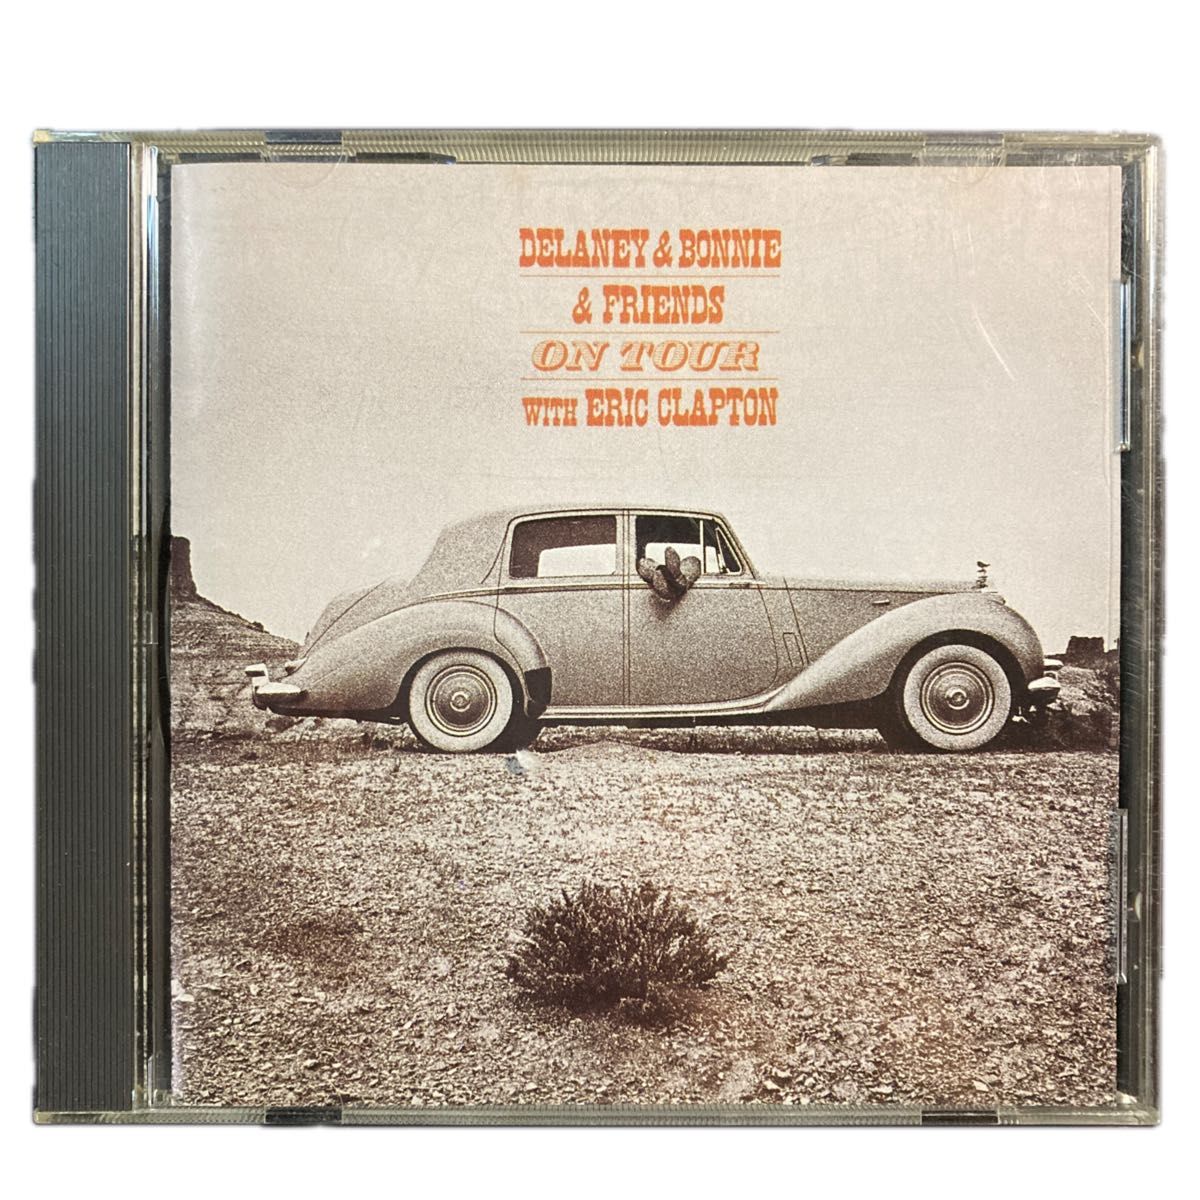 Delaney & Bonnie & Friends / On Tour With Eric Clapton デラニー&ボニー